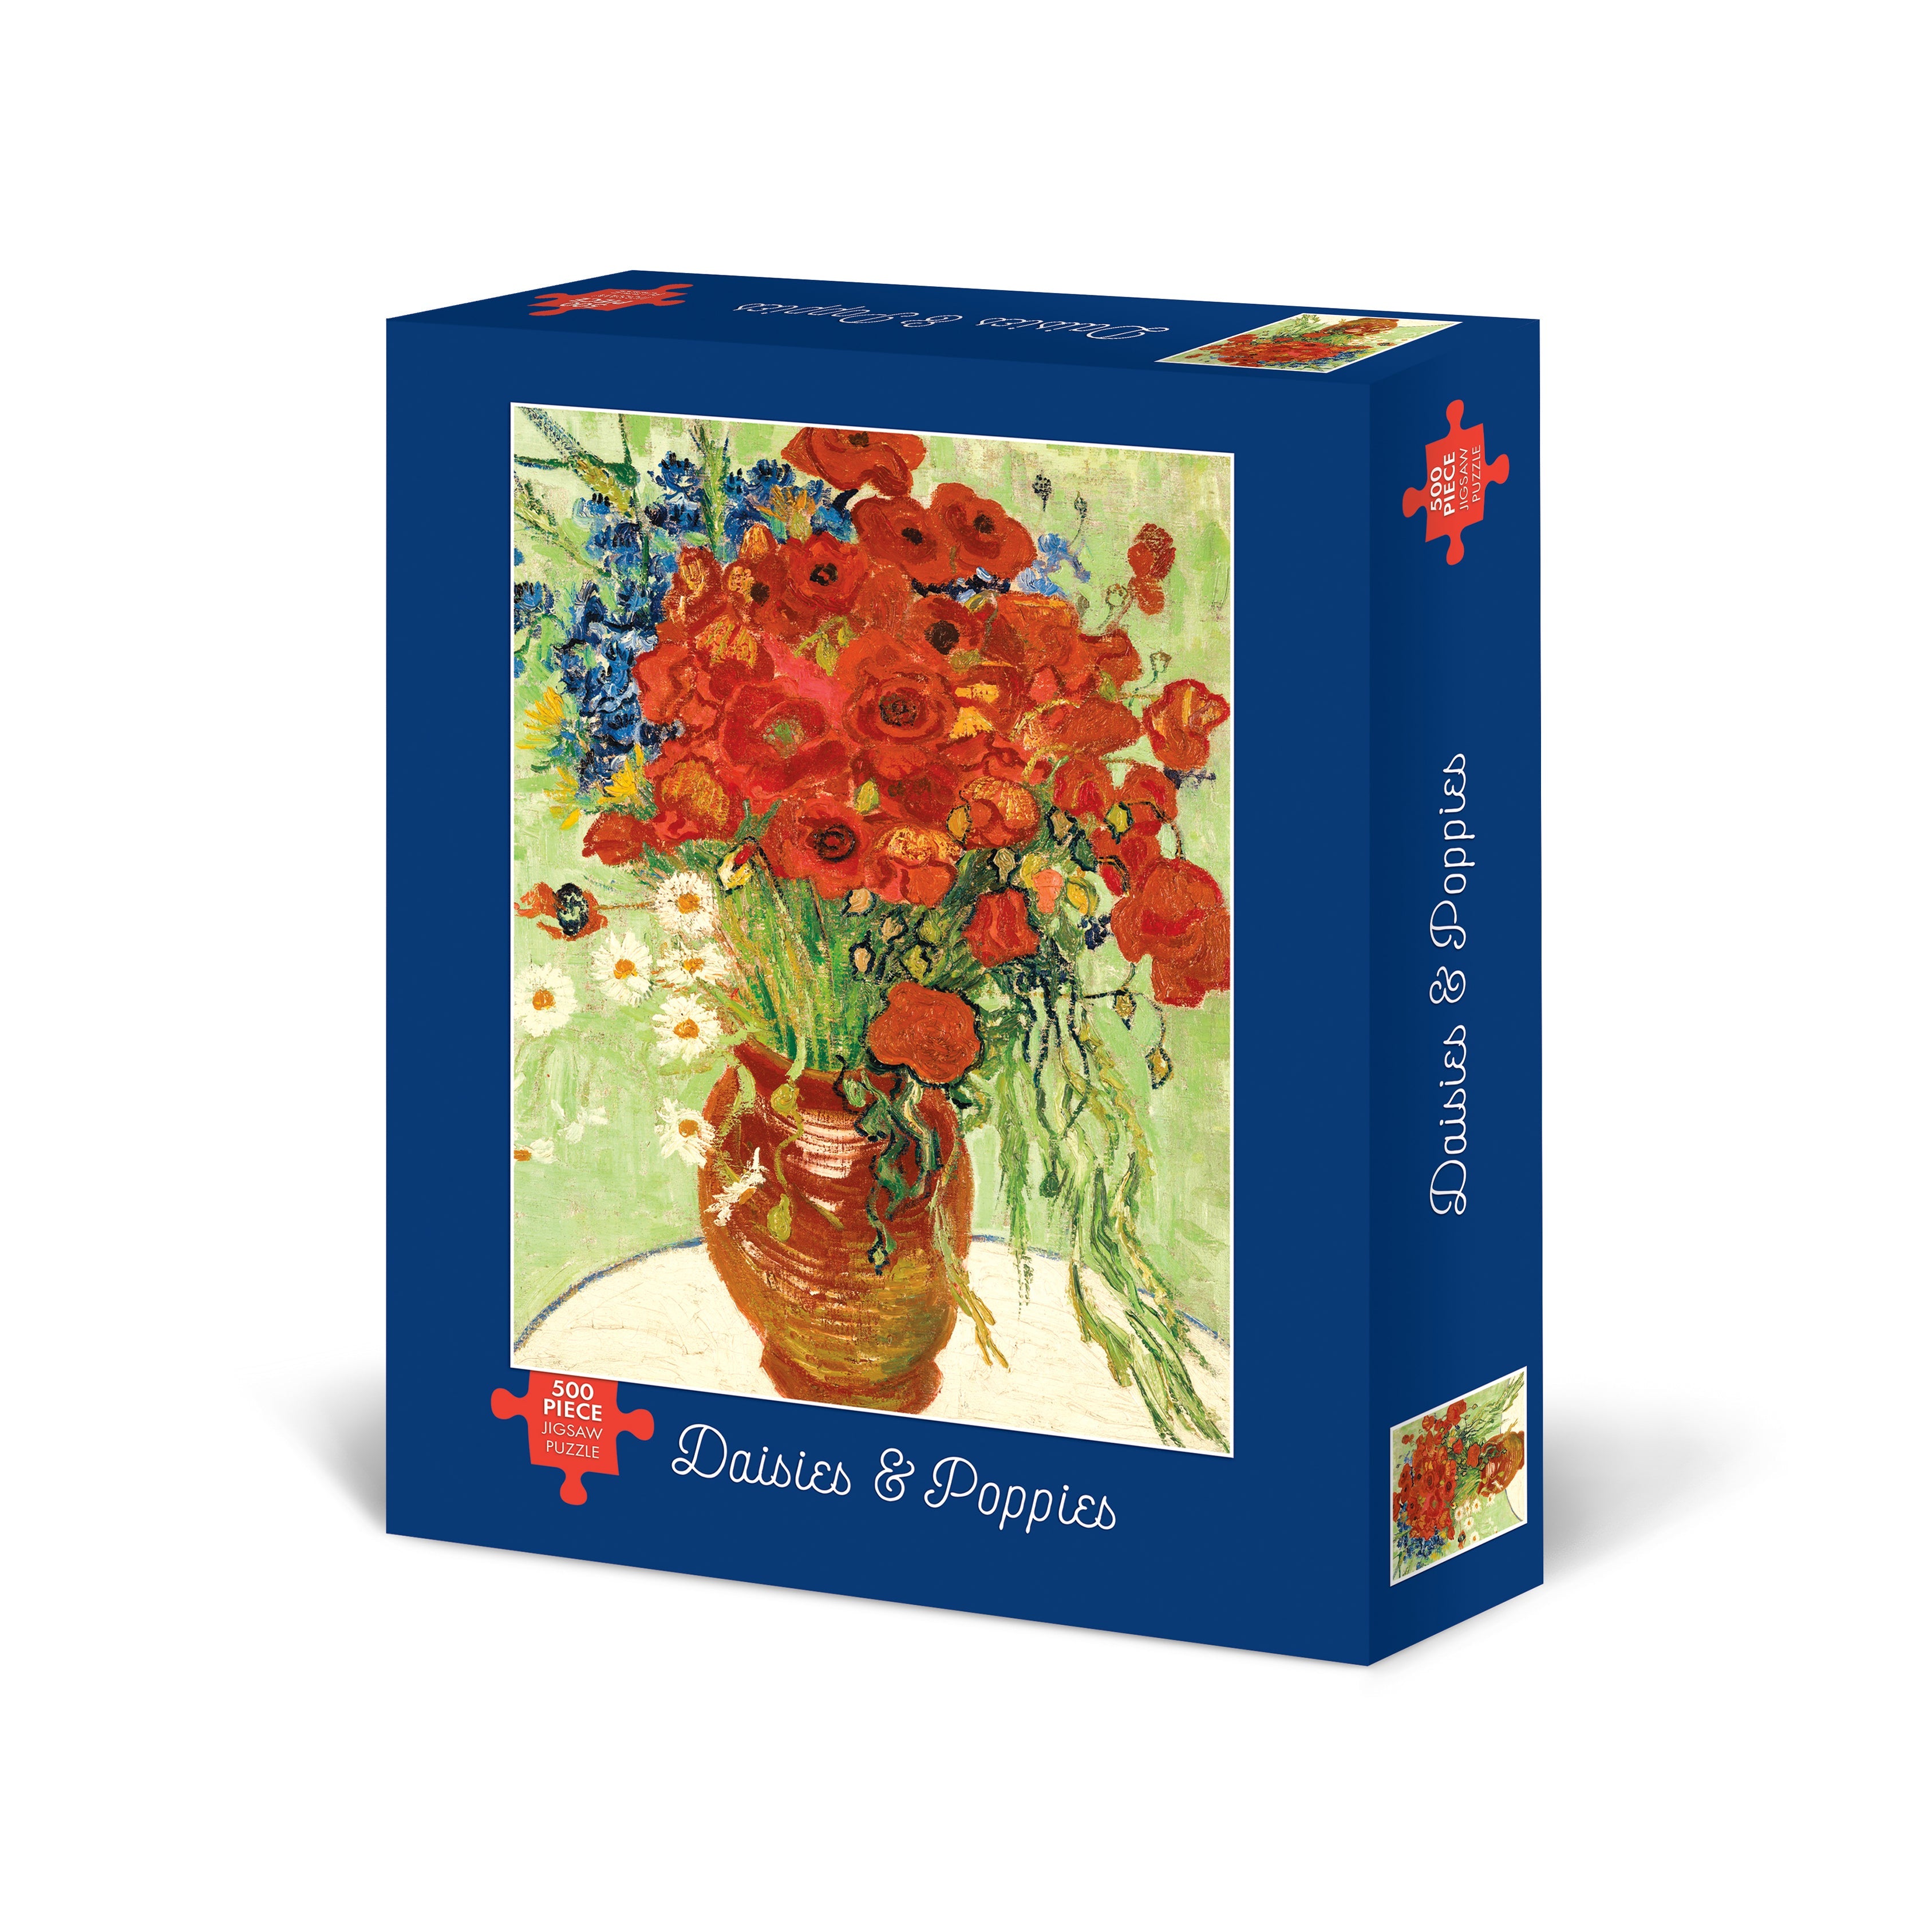 Daisies & Poppies 500 Piece - Jigsaw Puzzle